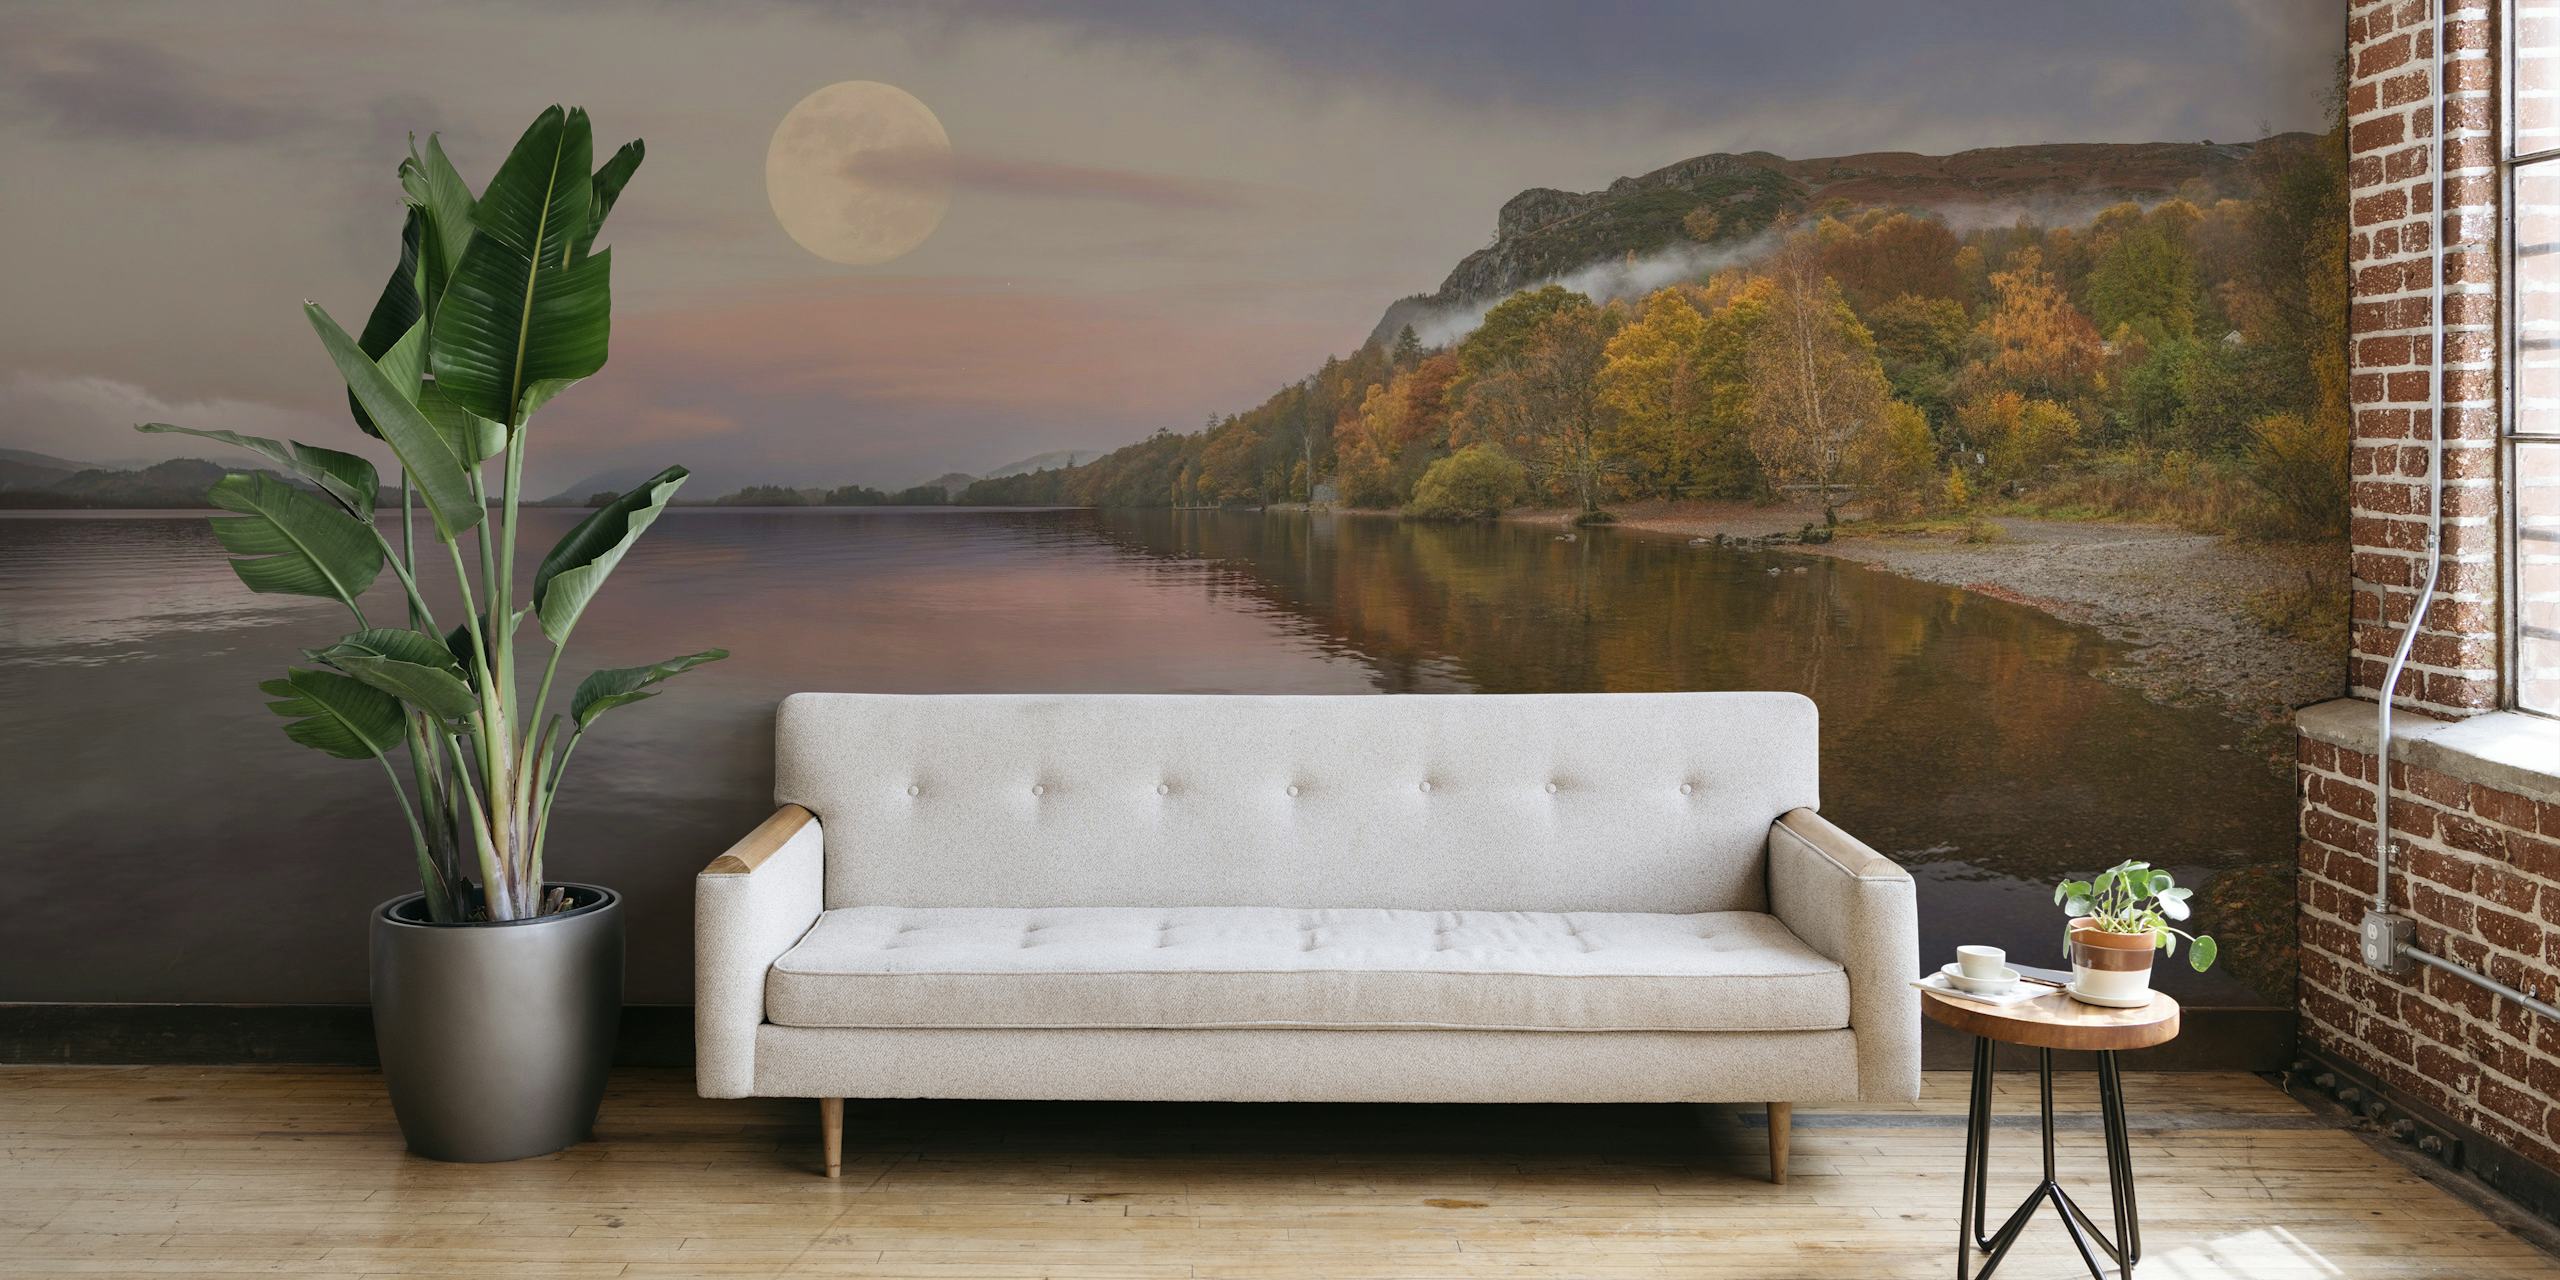 Serene Derwentwater Lake wall mural with moonlit sky and autumn reflections